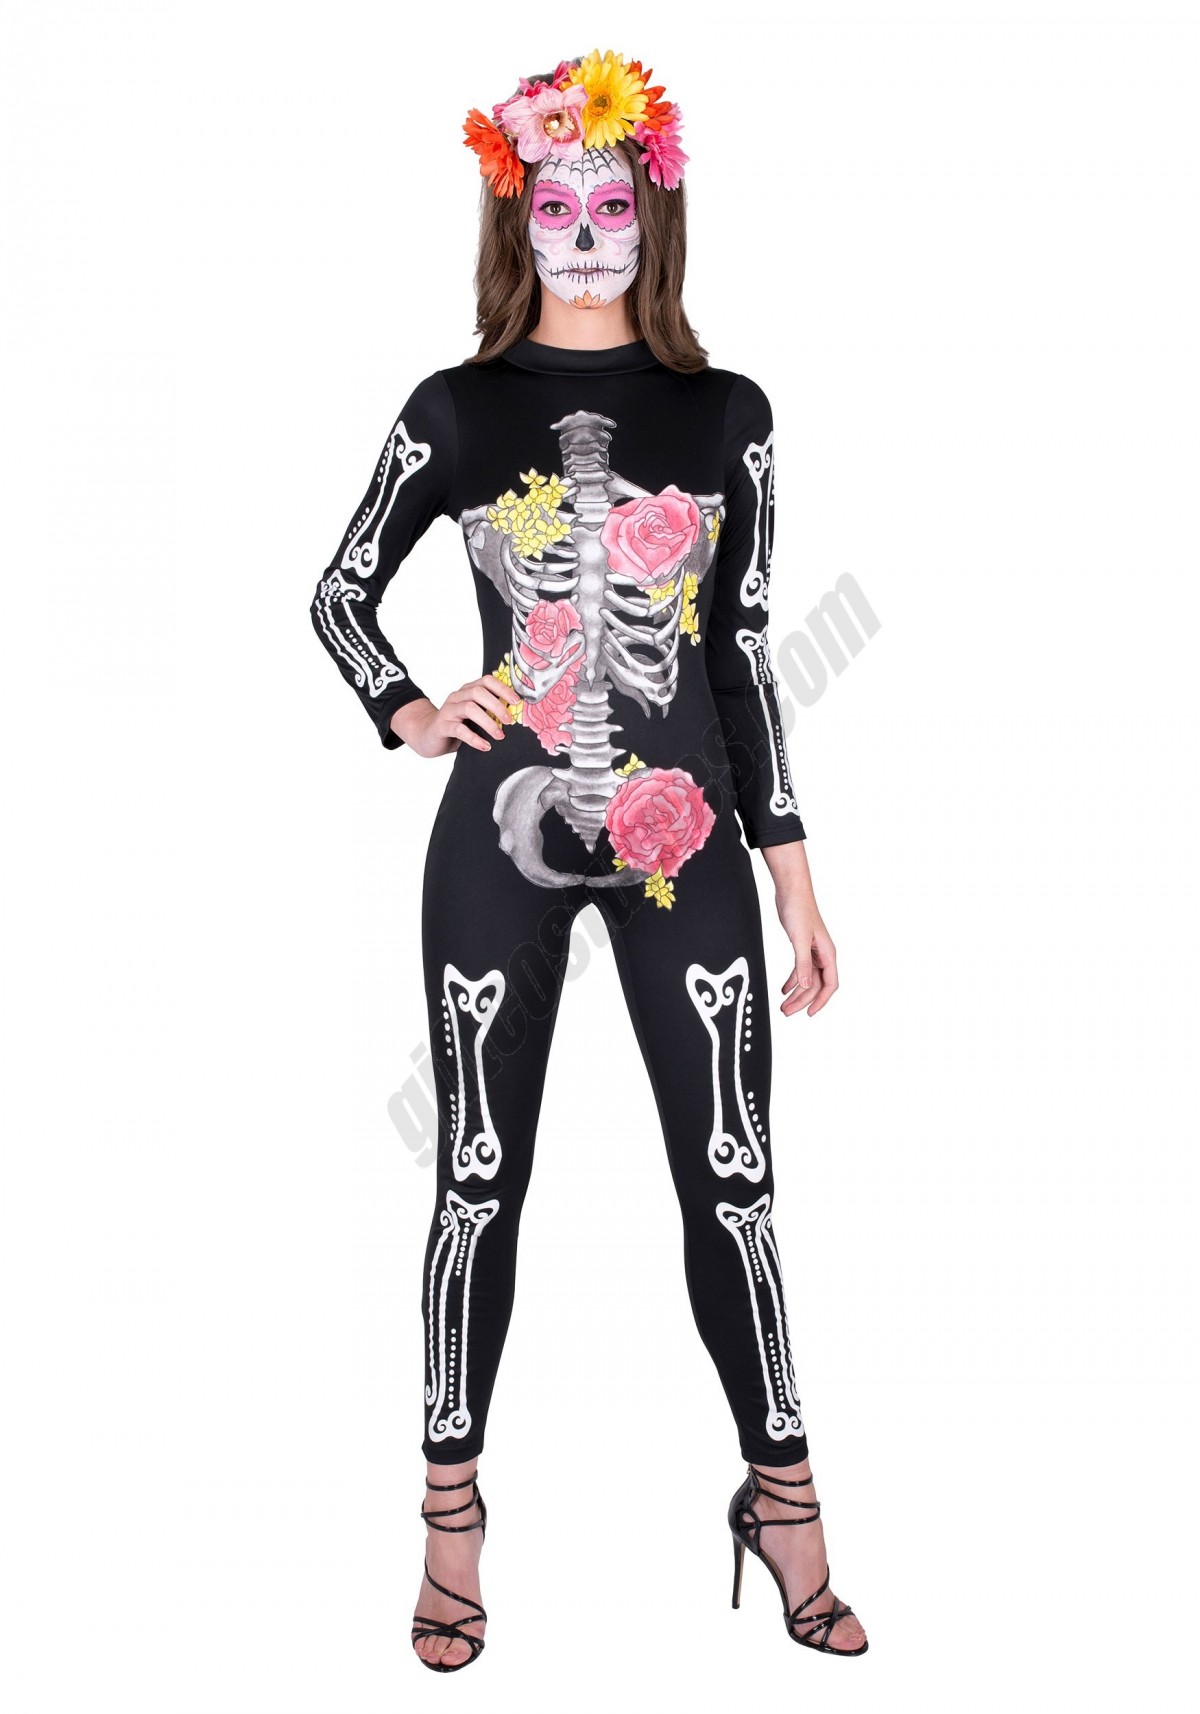 Women's Day of the Dead Catsuit Costume - -0